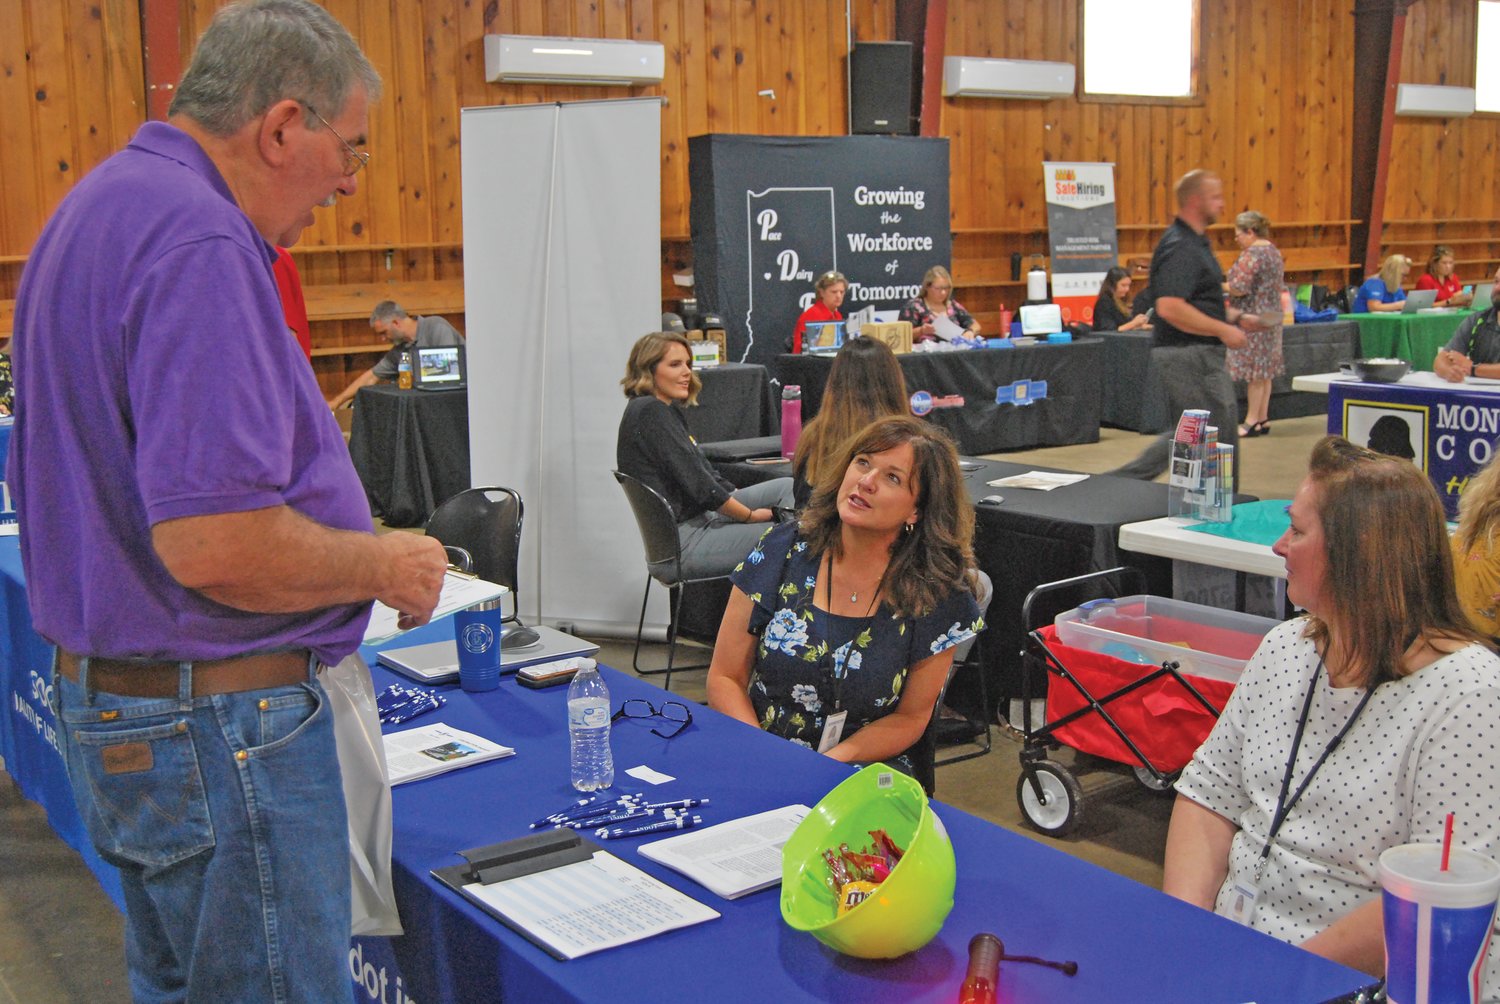 David Kessler, first from left, speaks Thursday with Debbie Calder and Tammy Lucas of the Indiana Department of Transportation at the Crawfordsville/Montgomery County Job Fair at the Montgomery County Fairgrounds.